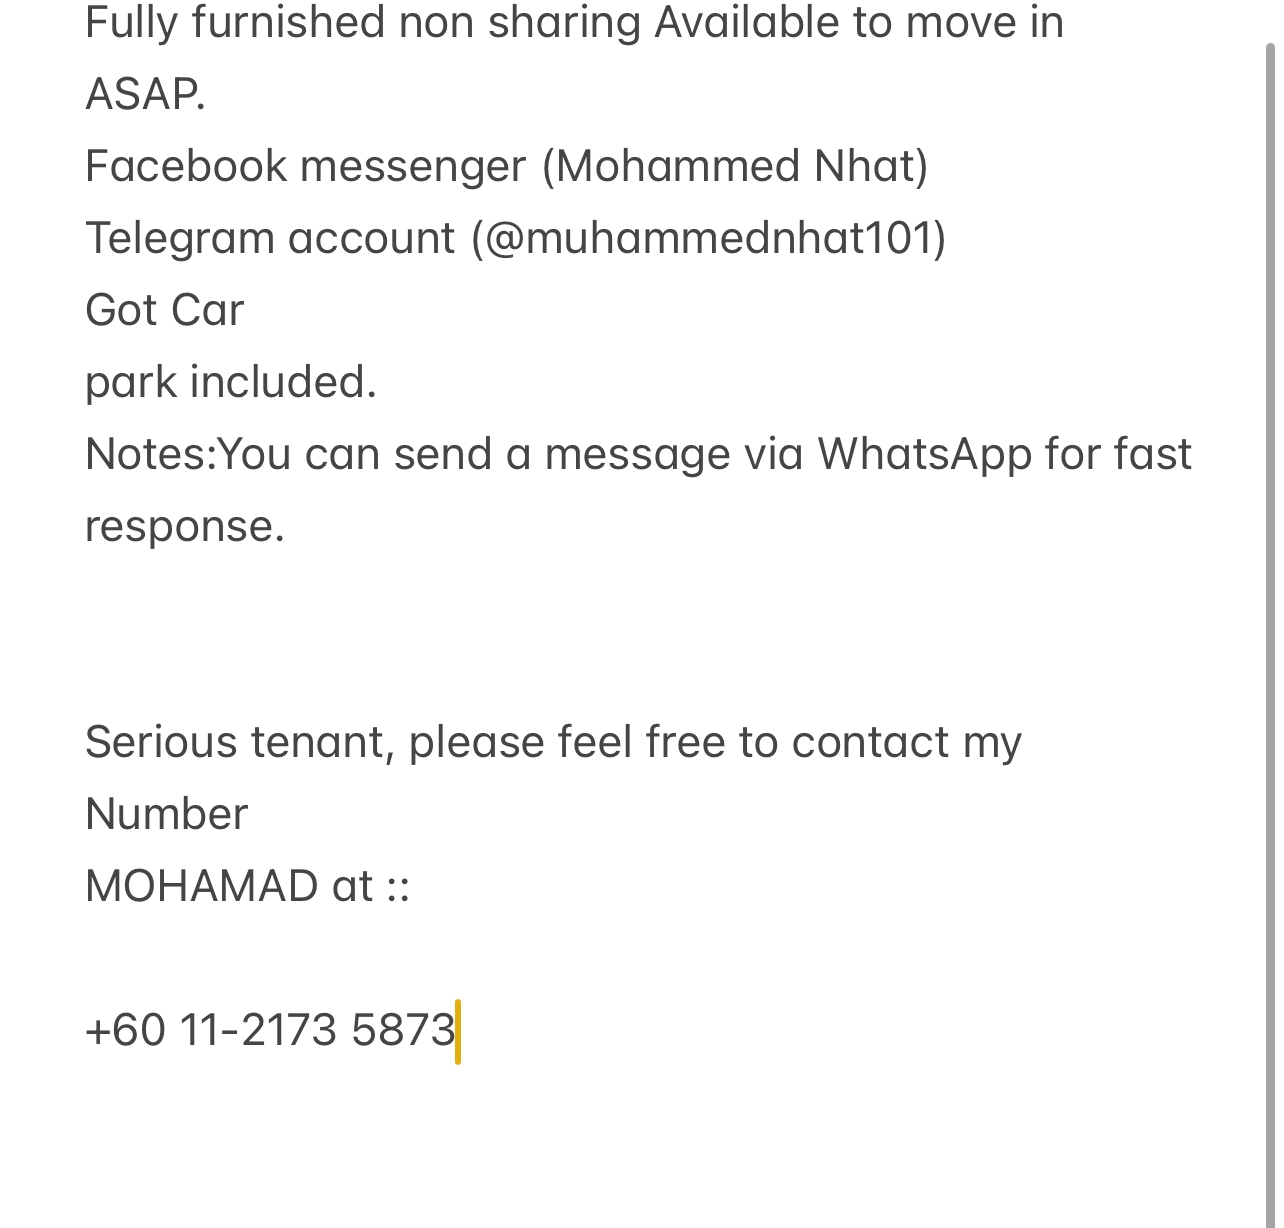 room for rent, master room, lorong teck chai avenue, Send the owner a message on WhatsApp/facebook if you want to RENT the unit facebook (Mohammed Nhat)&Telegram(@muhammednhat101) Fully furnished non sharing :(comfortable)